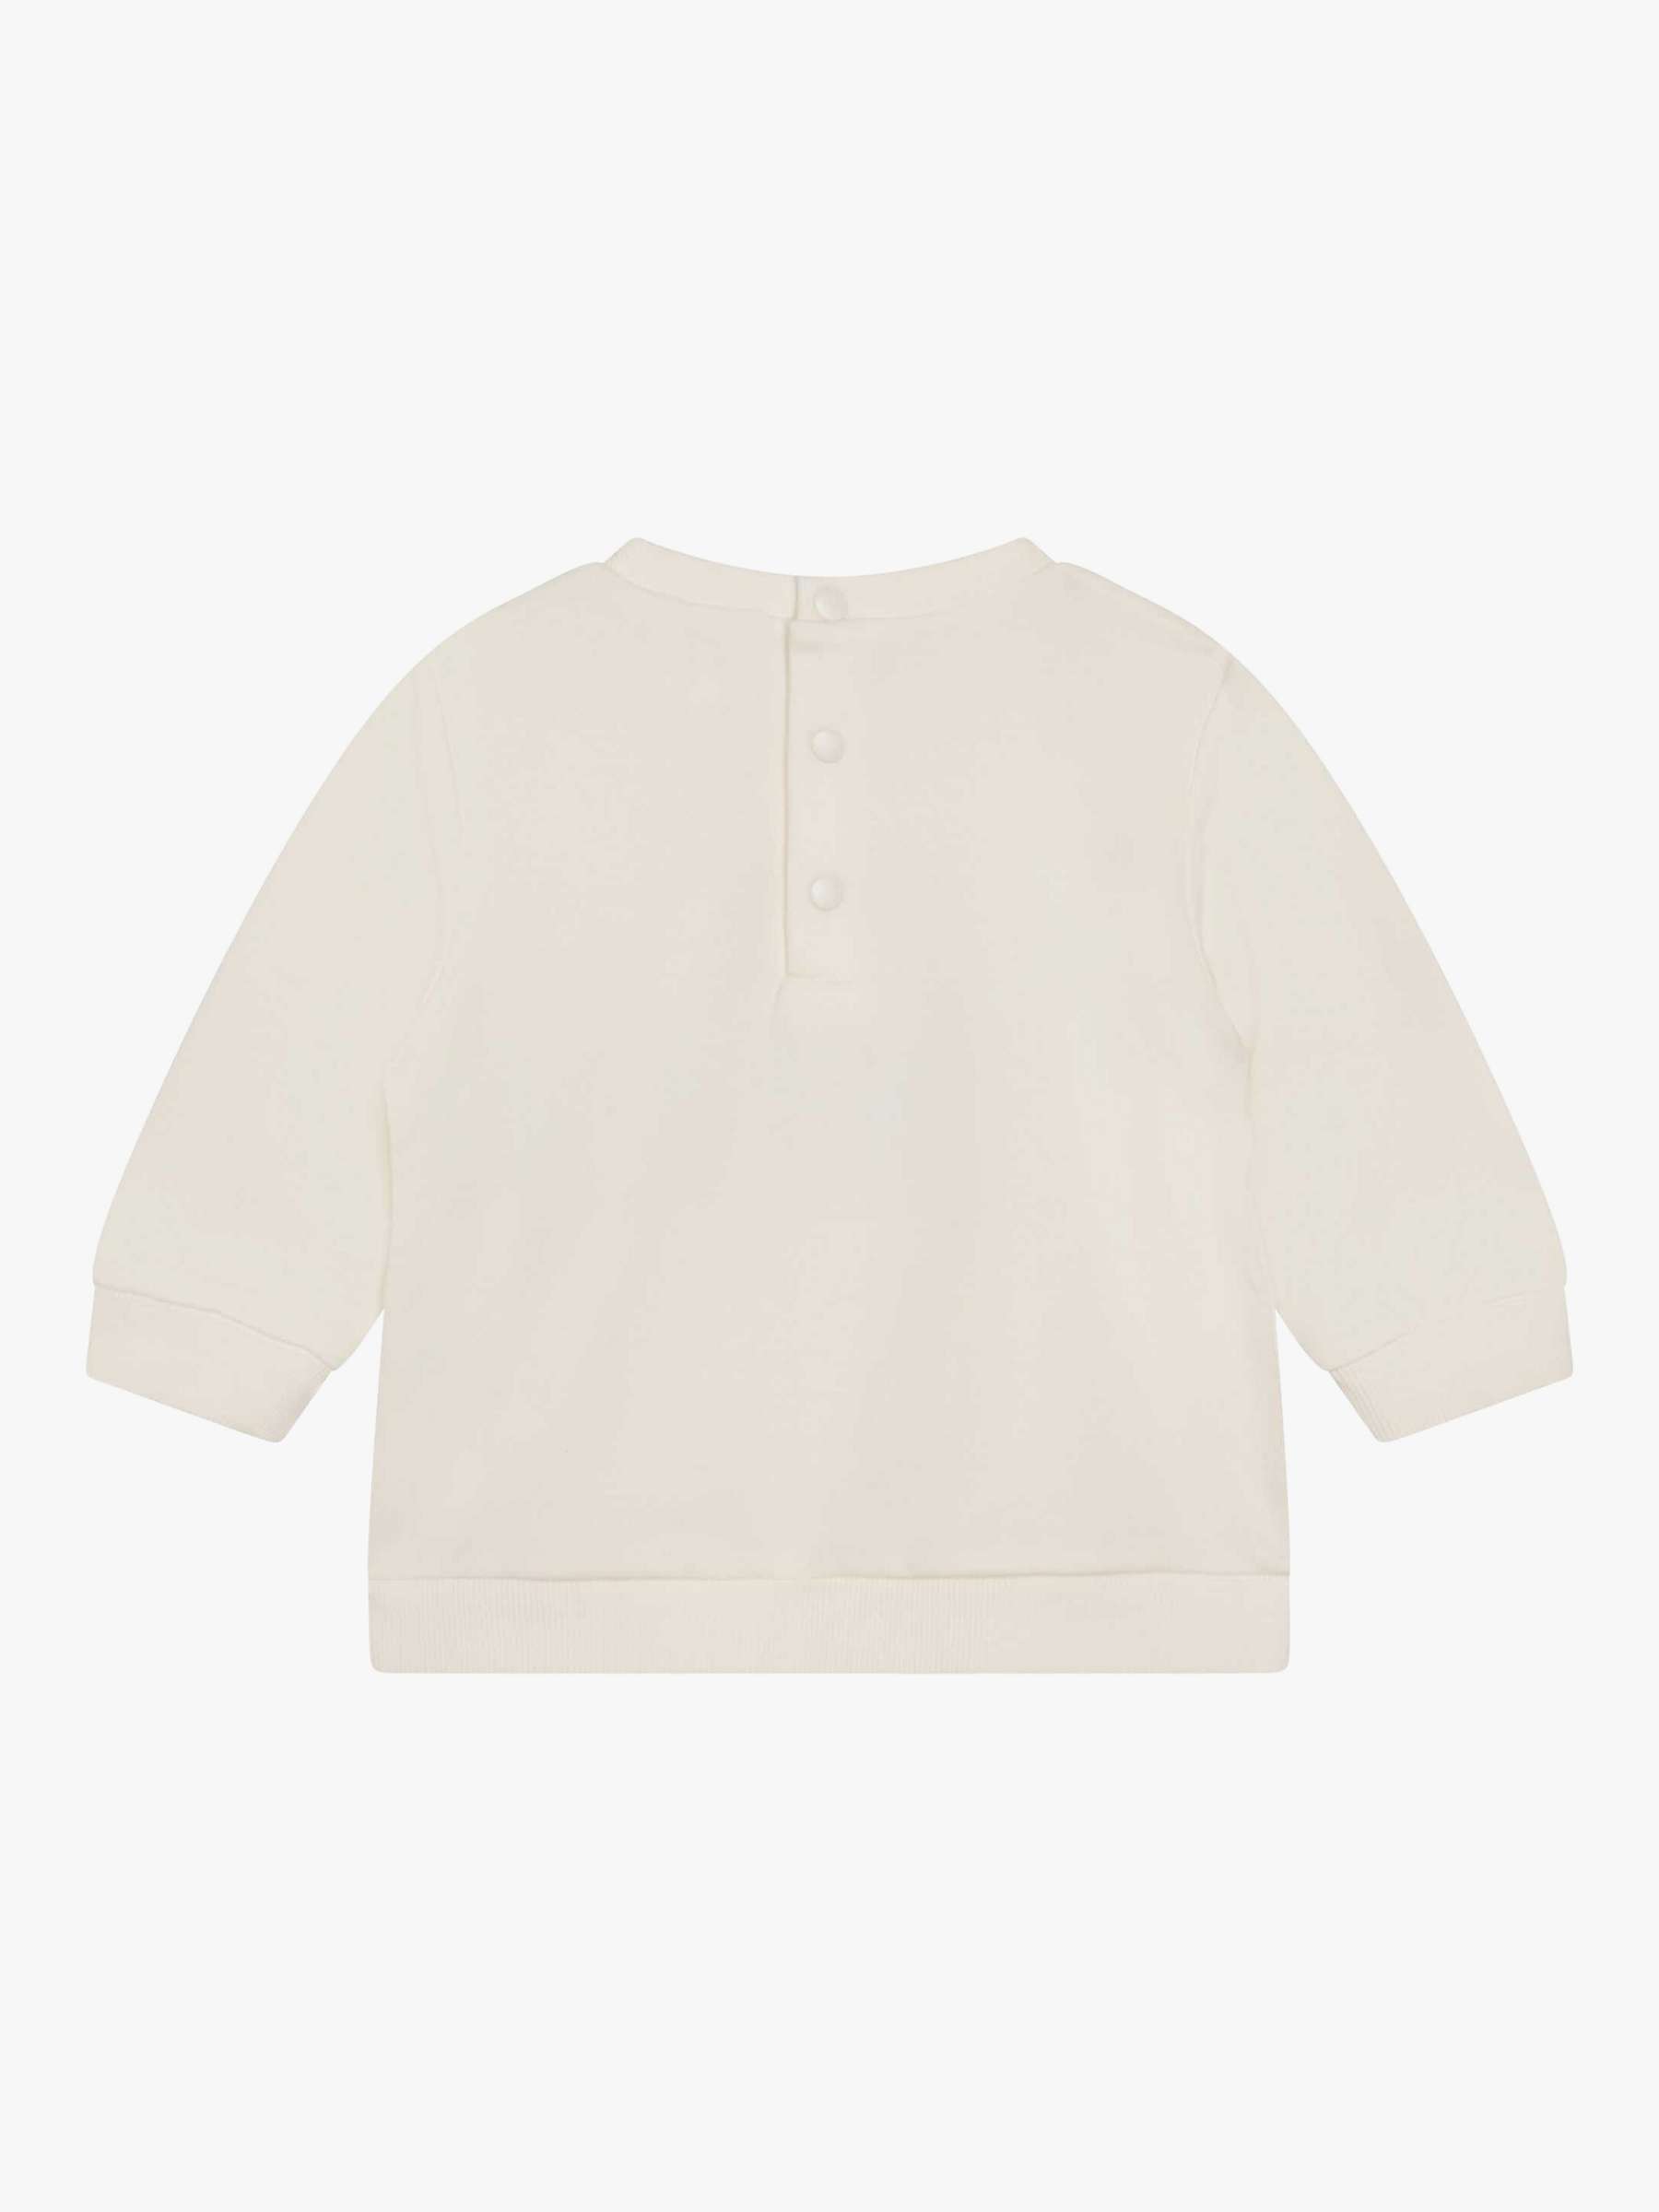 Buy Carrément Beau Baby French Terry Jungle Jumper, White/Multi Online at johnlewis.com